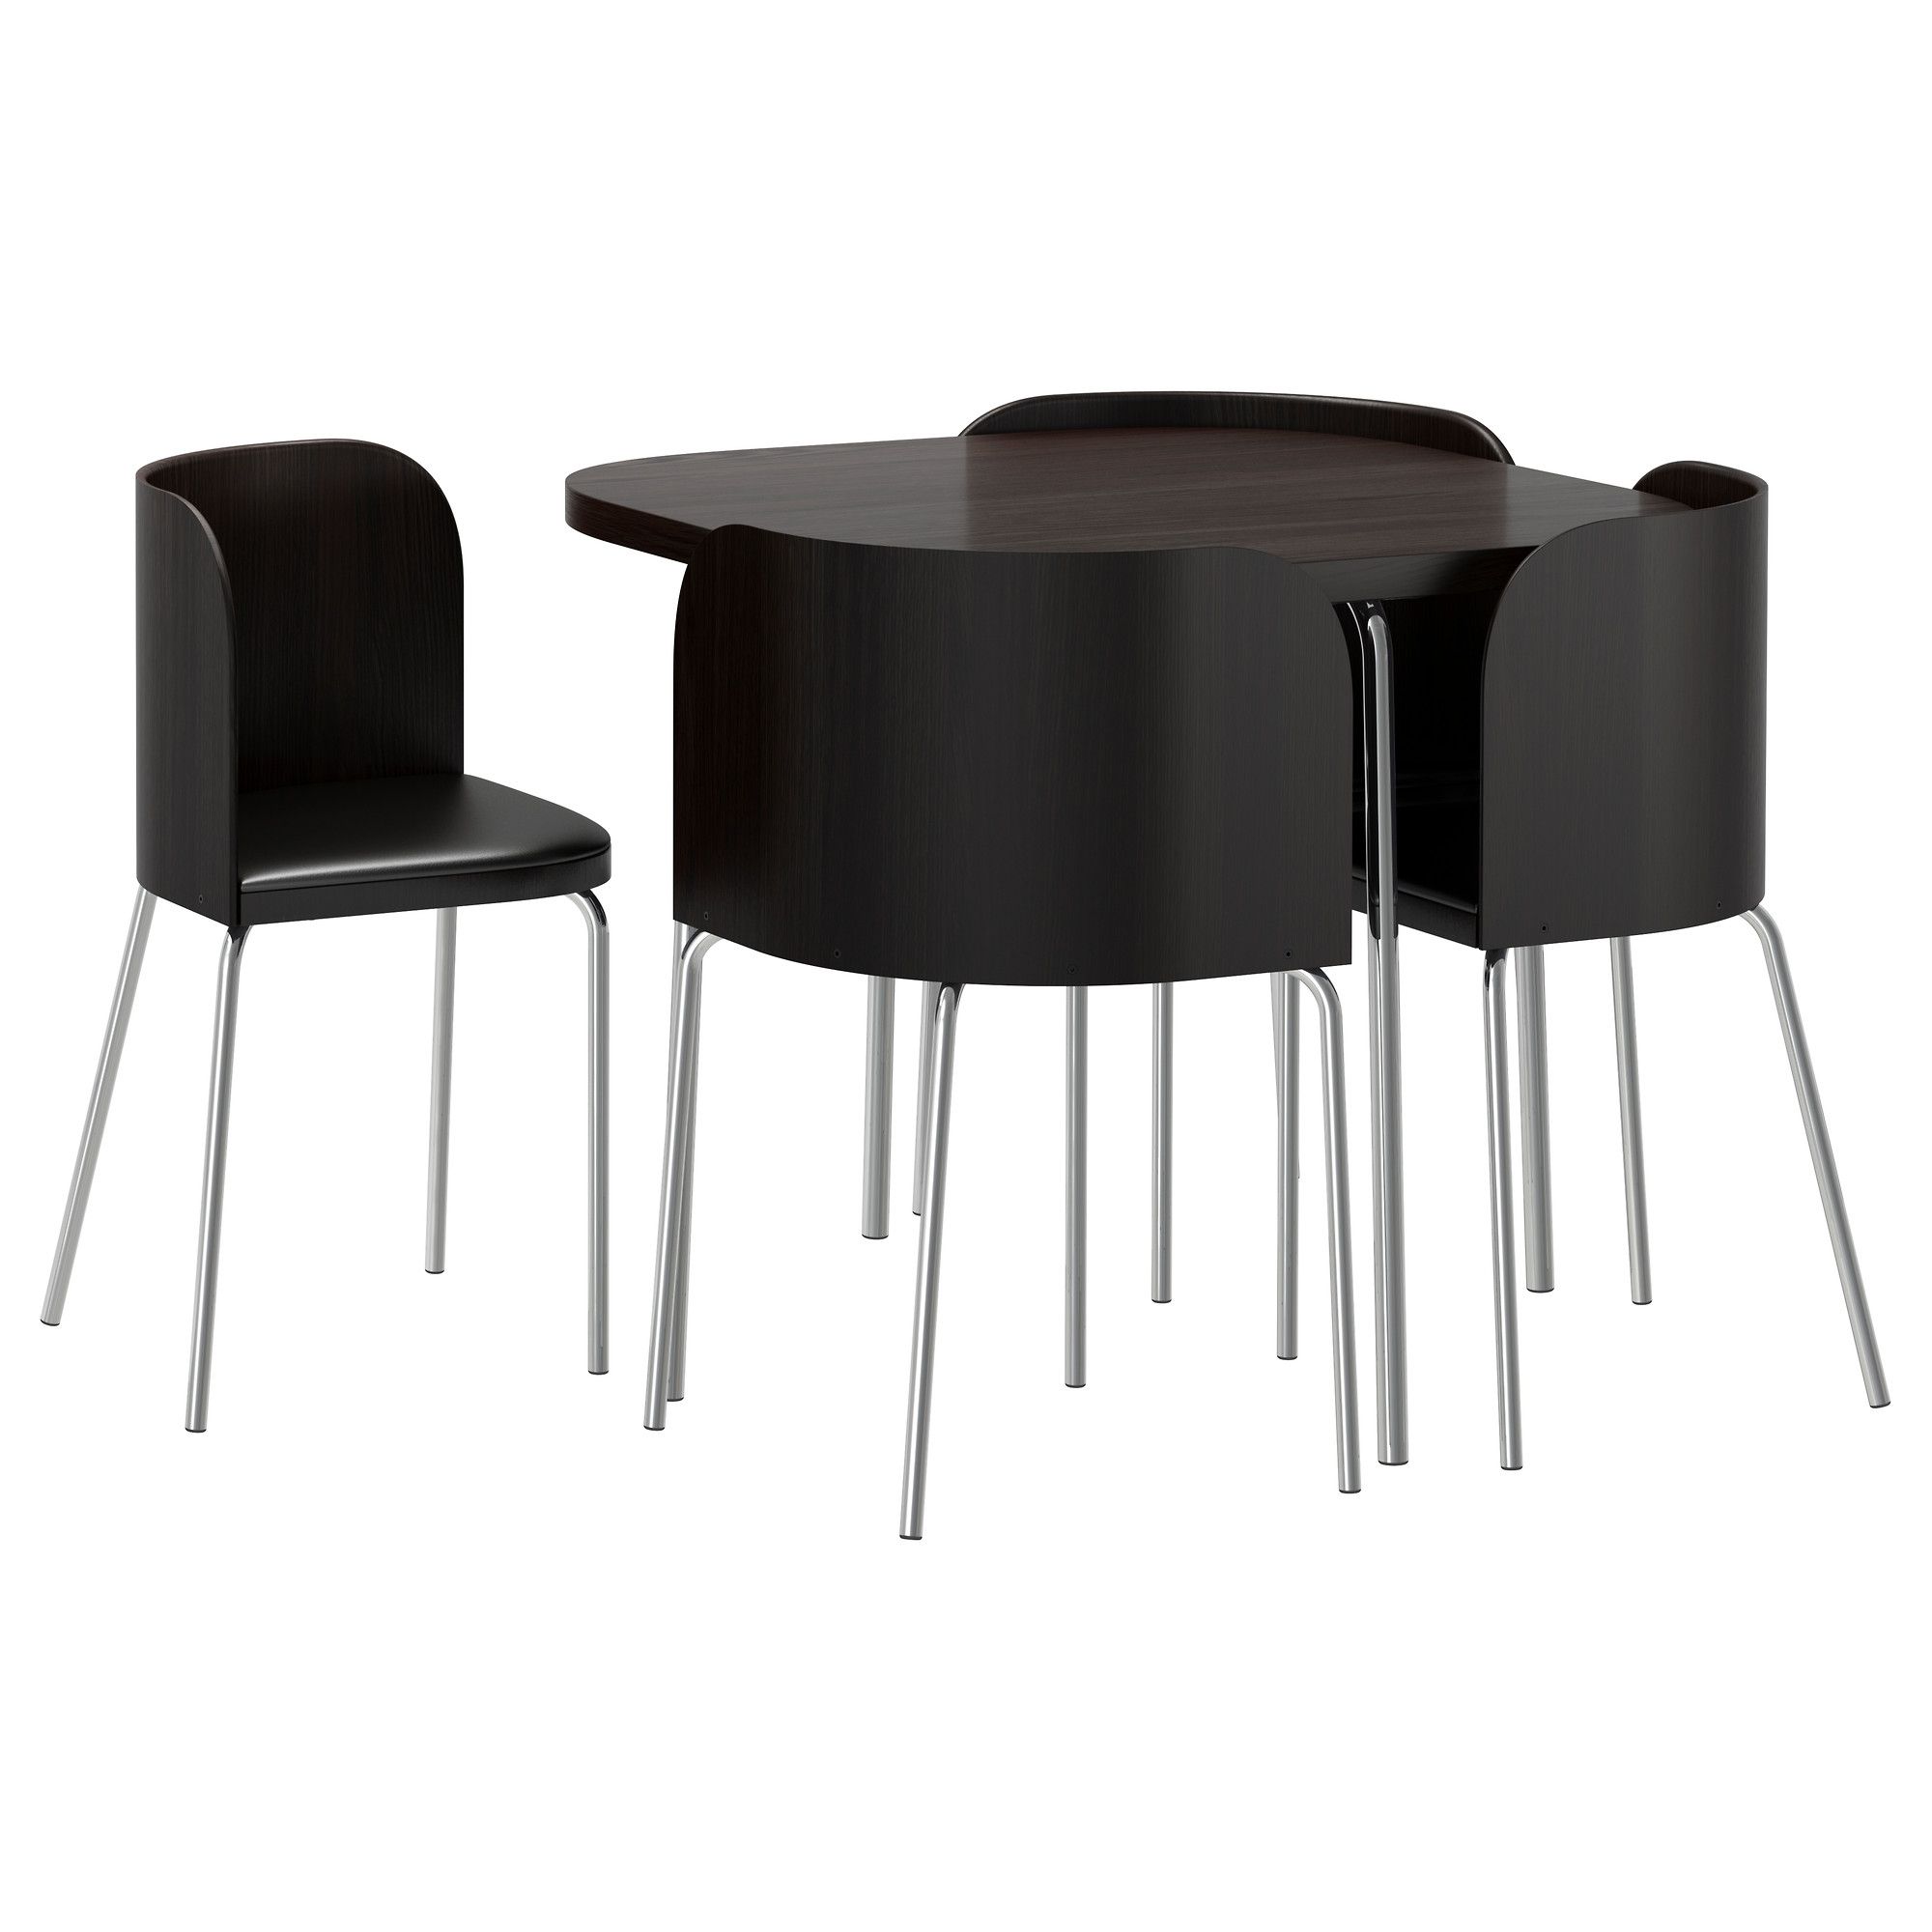 Dining Room With Well Known Ikea Round Dining Tables Set (View 11 of 25)